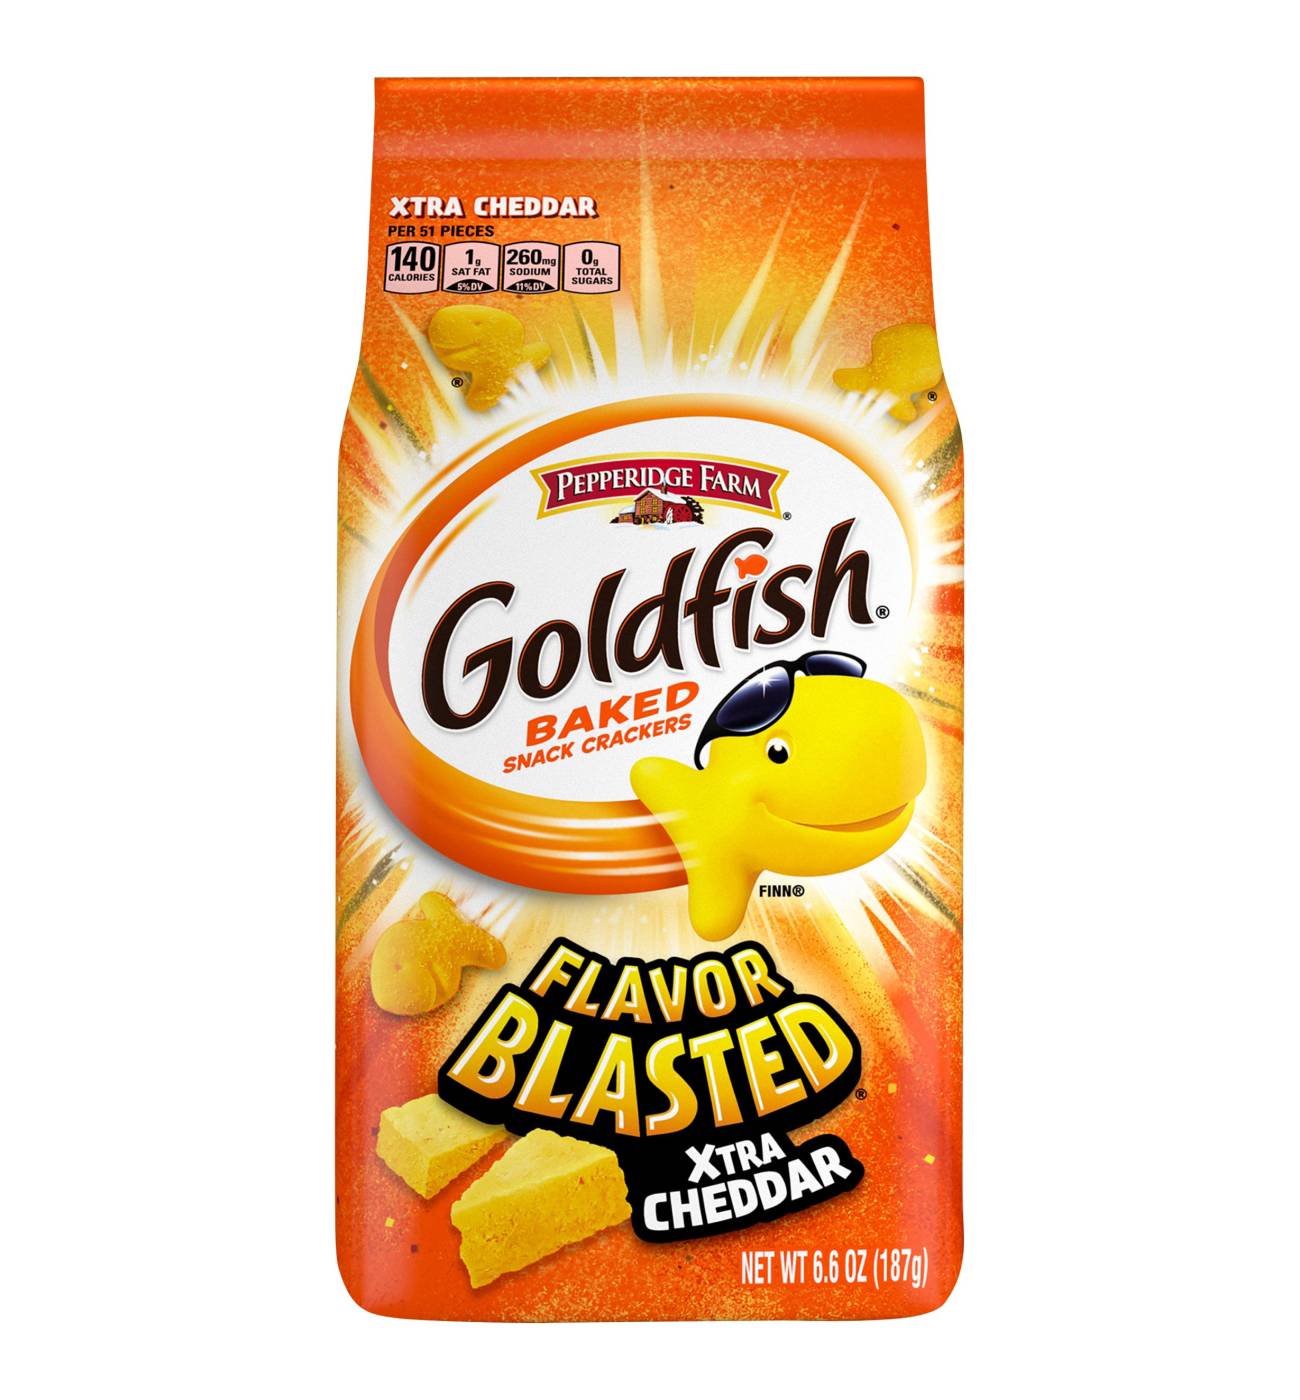 Pepperidge Farm Goldfish Flavor Blasted Xtra Cheddar Baked Snack Crackers; image 1 of 3